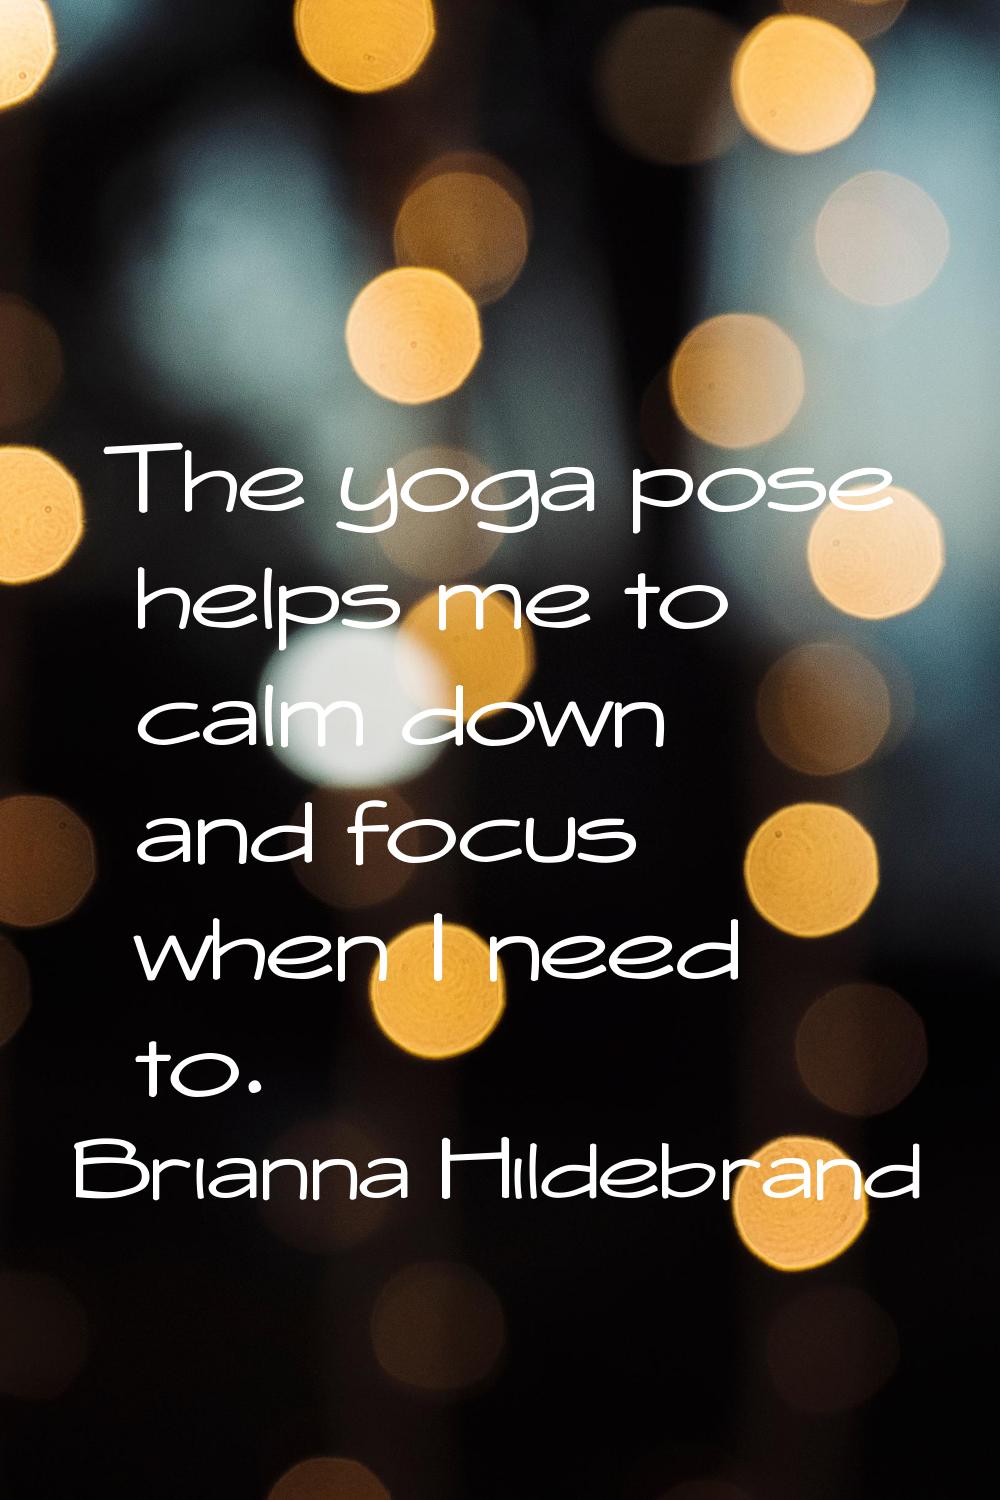 The yoga pose helps me to calm down and focus when I need to.